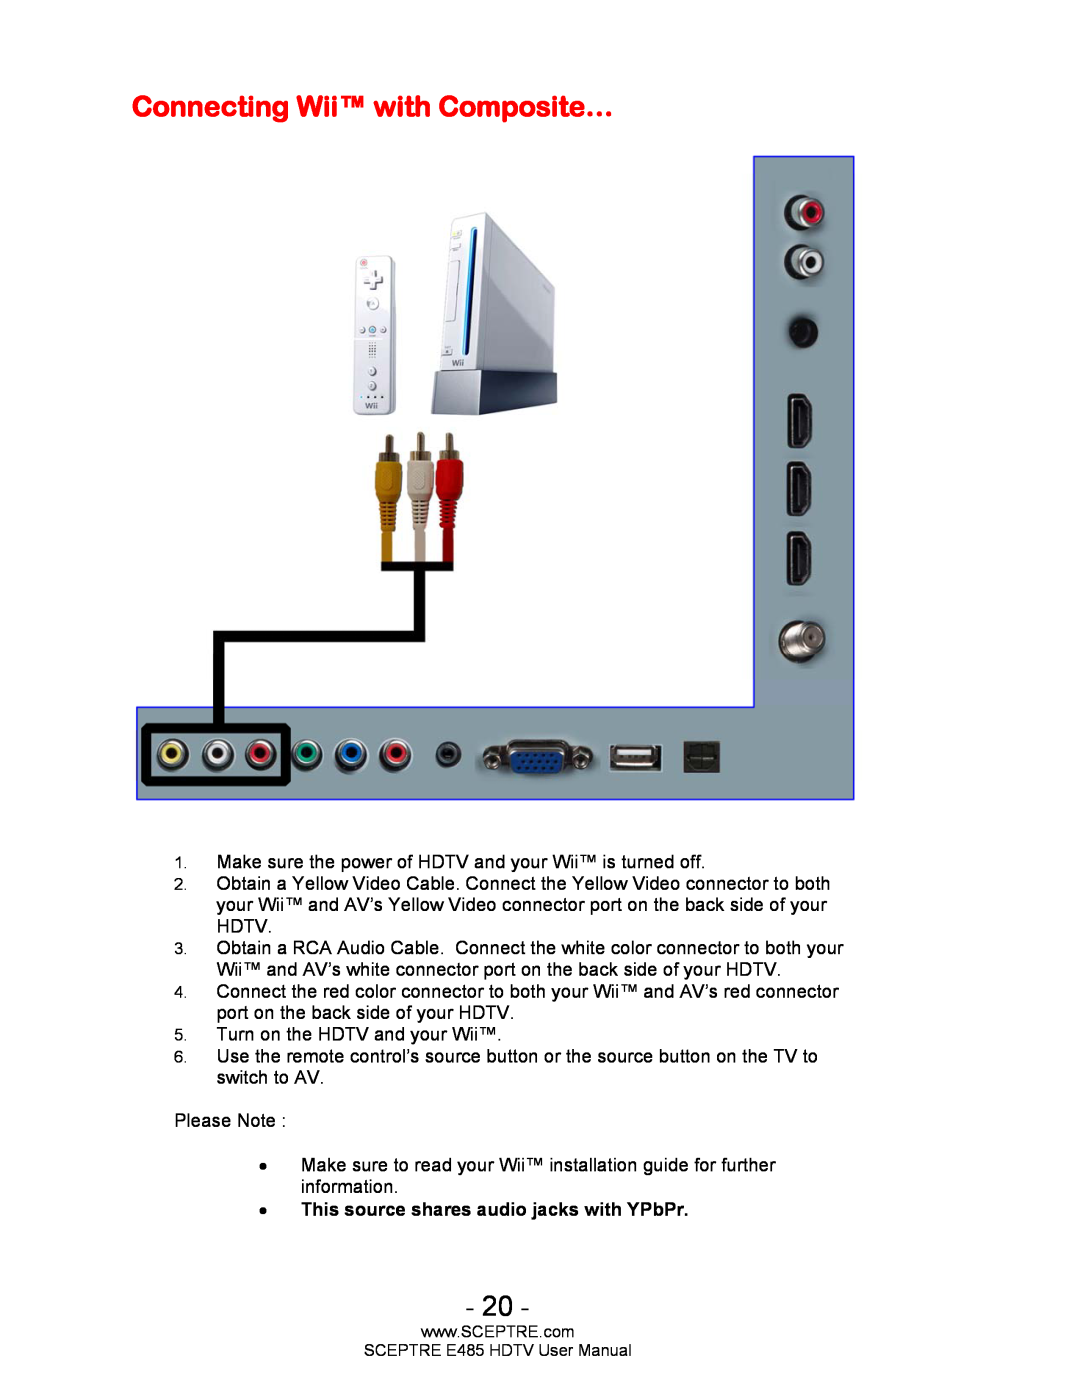 Sceptre Technologies E485 user manual Connecting Wii with Composite…, This source shares audio jacks with YPbPr 